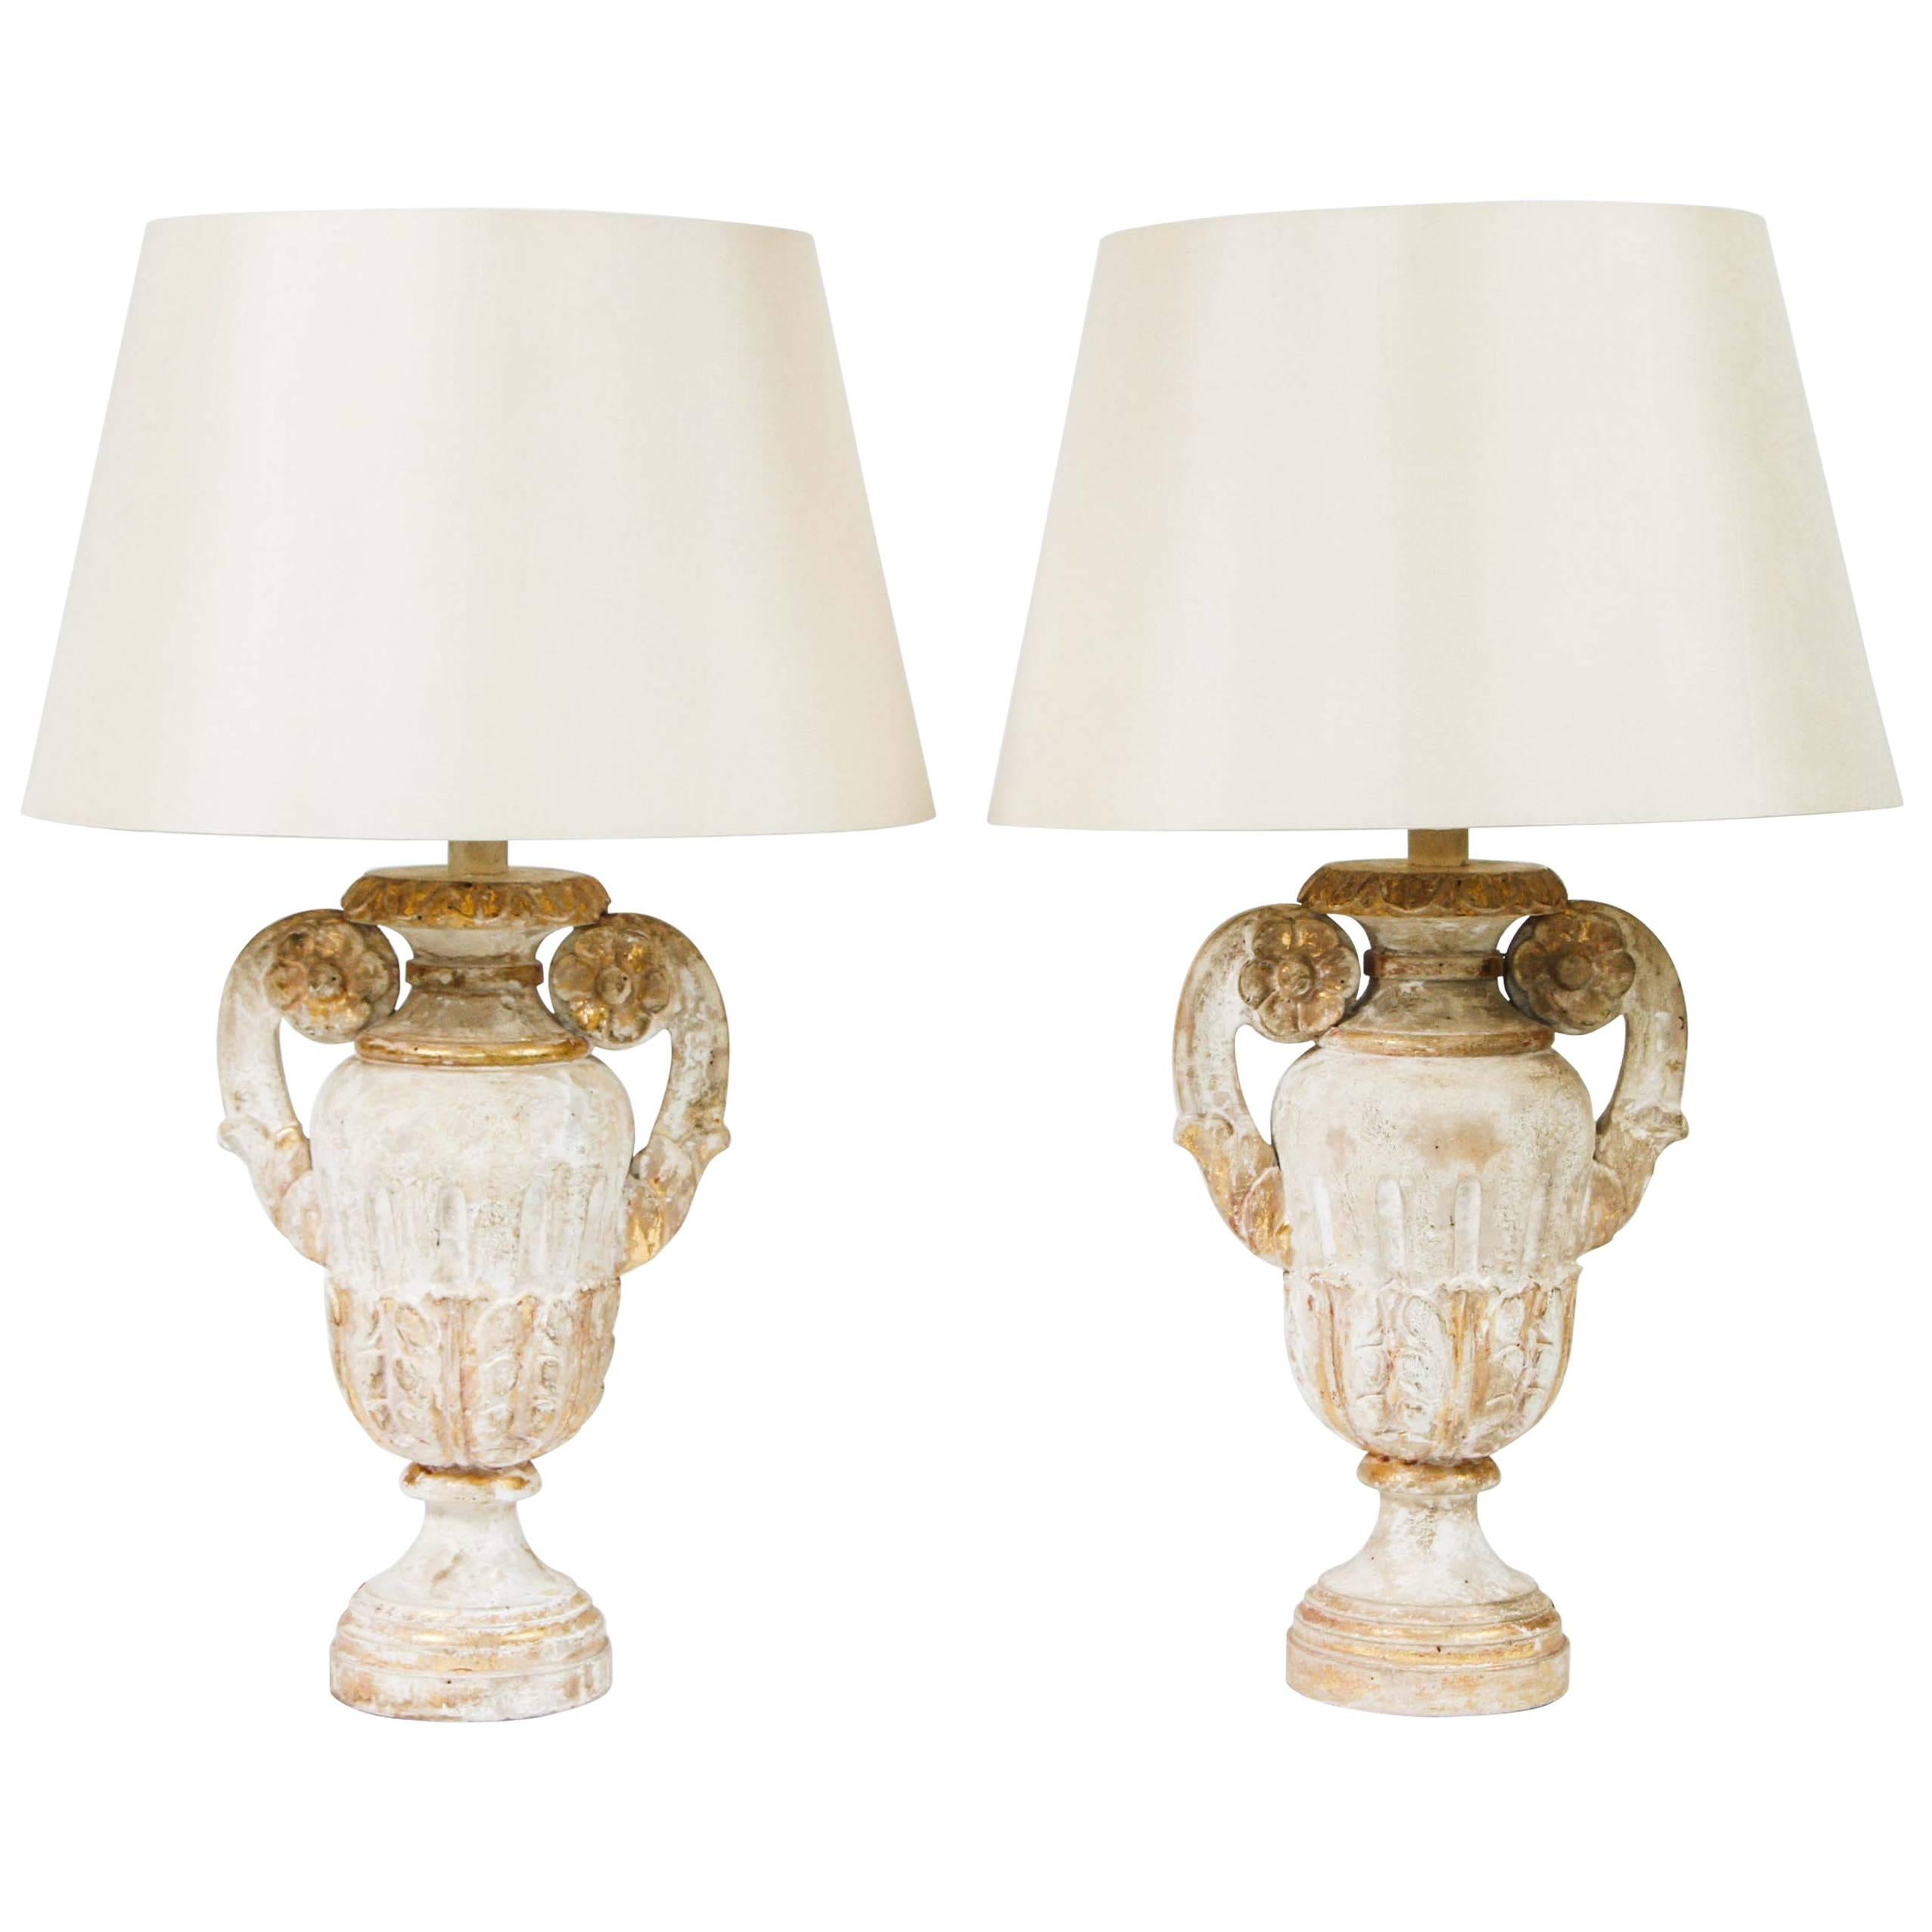 A Pair of Italian Urns, 19th c. converted to Table Lamps For Sale